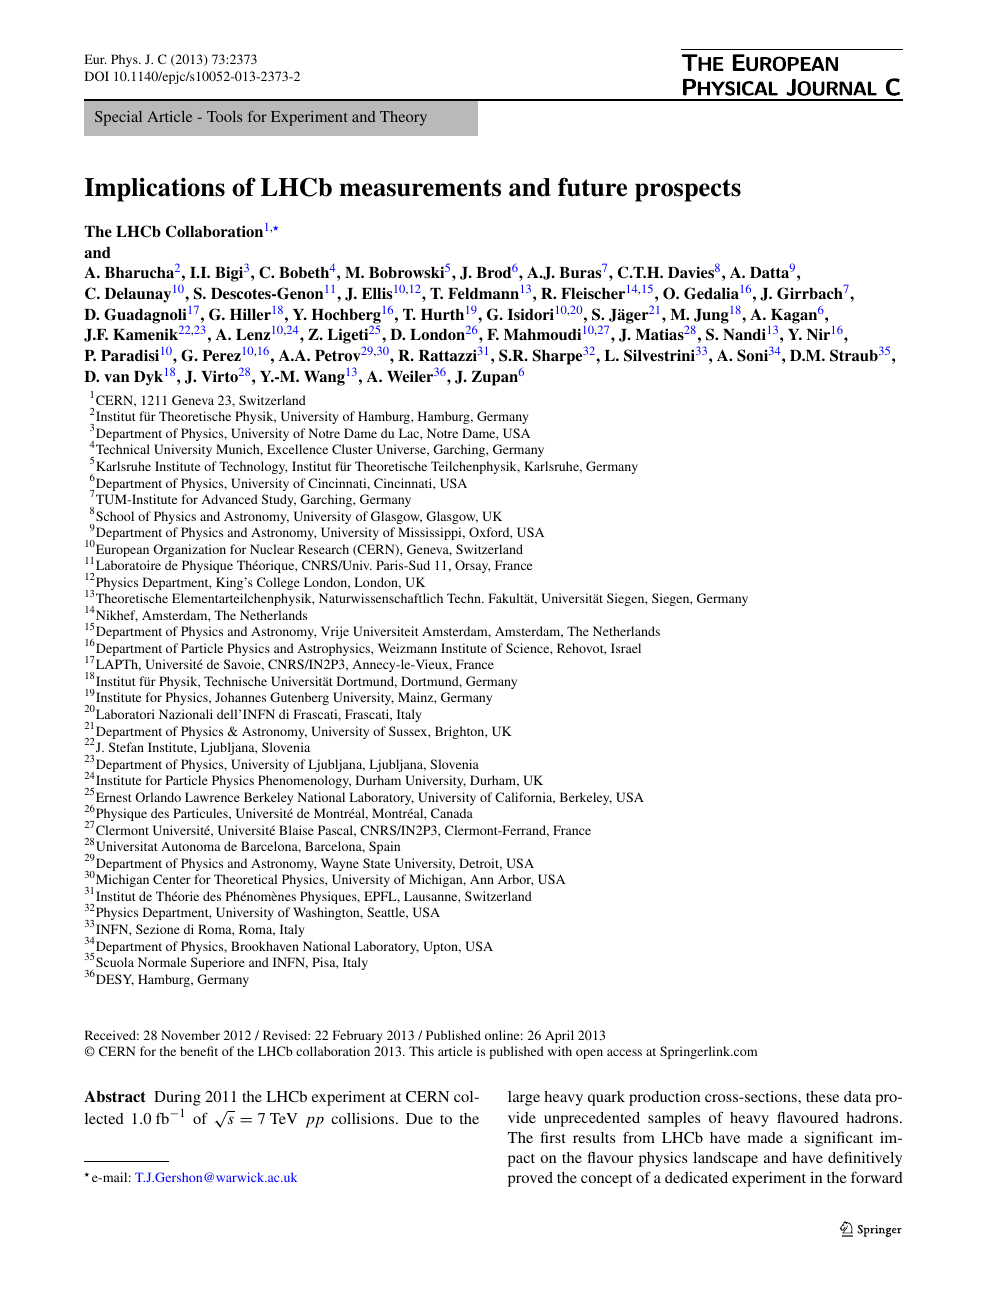 Implications Of Lhcb Measurements And Future Prospects Topic Of Research Paper In Physical Sciences Download Scholarly Article Pdf And Read For Free On Cyberleninka Open Science Hub